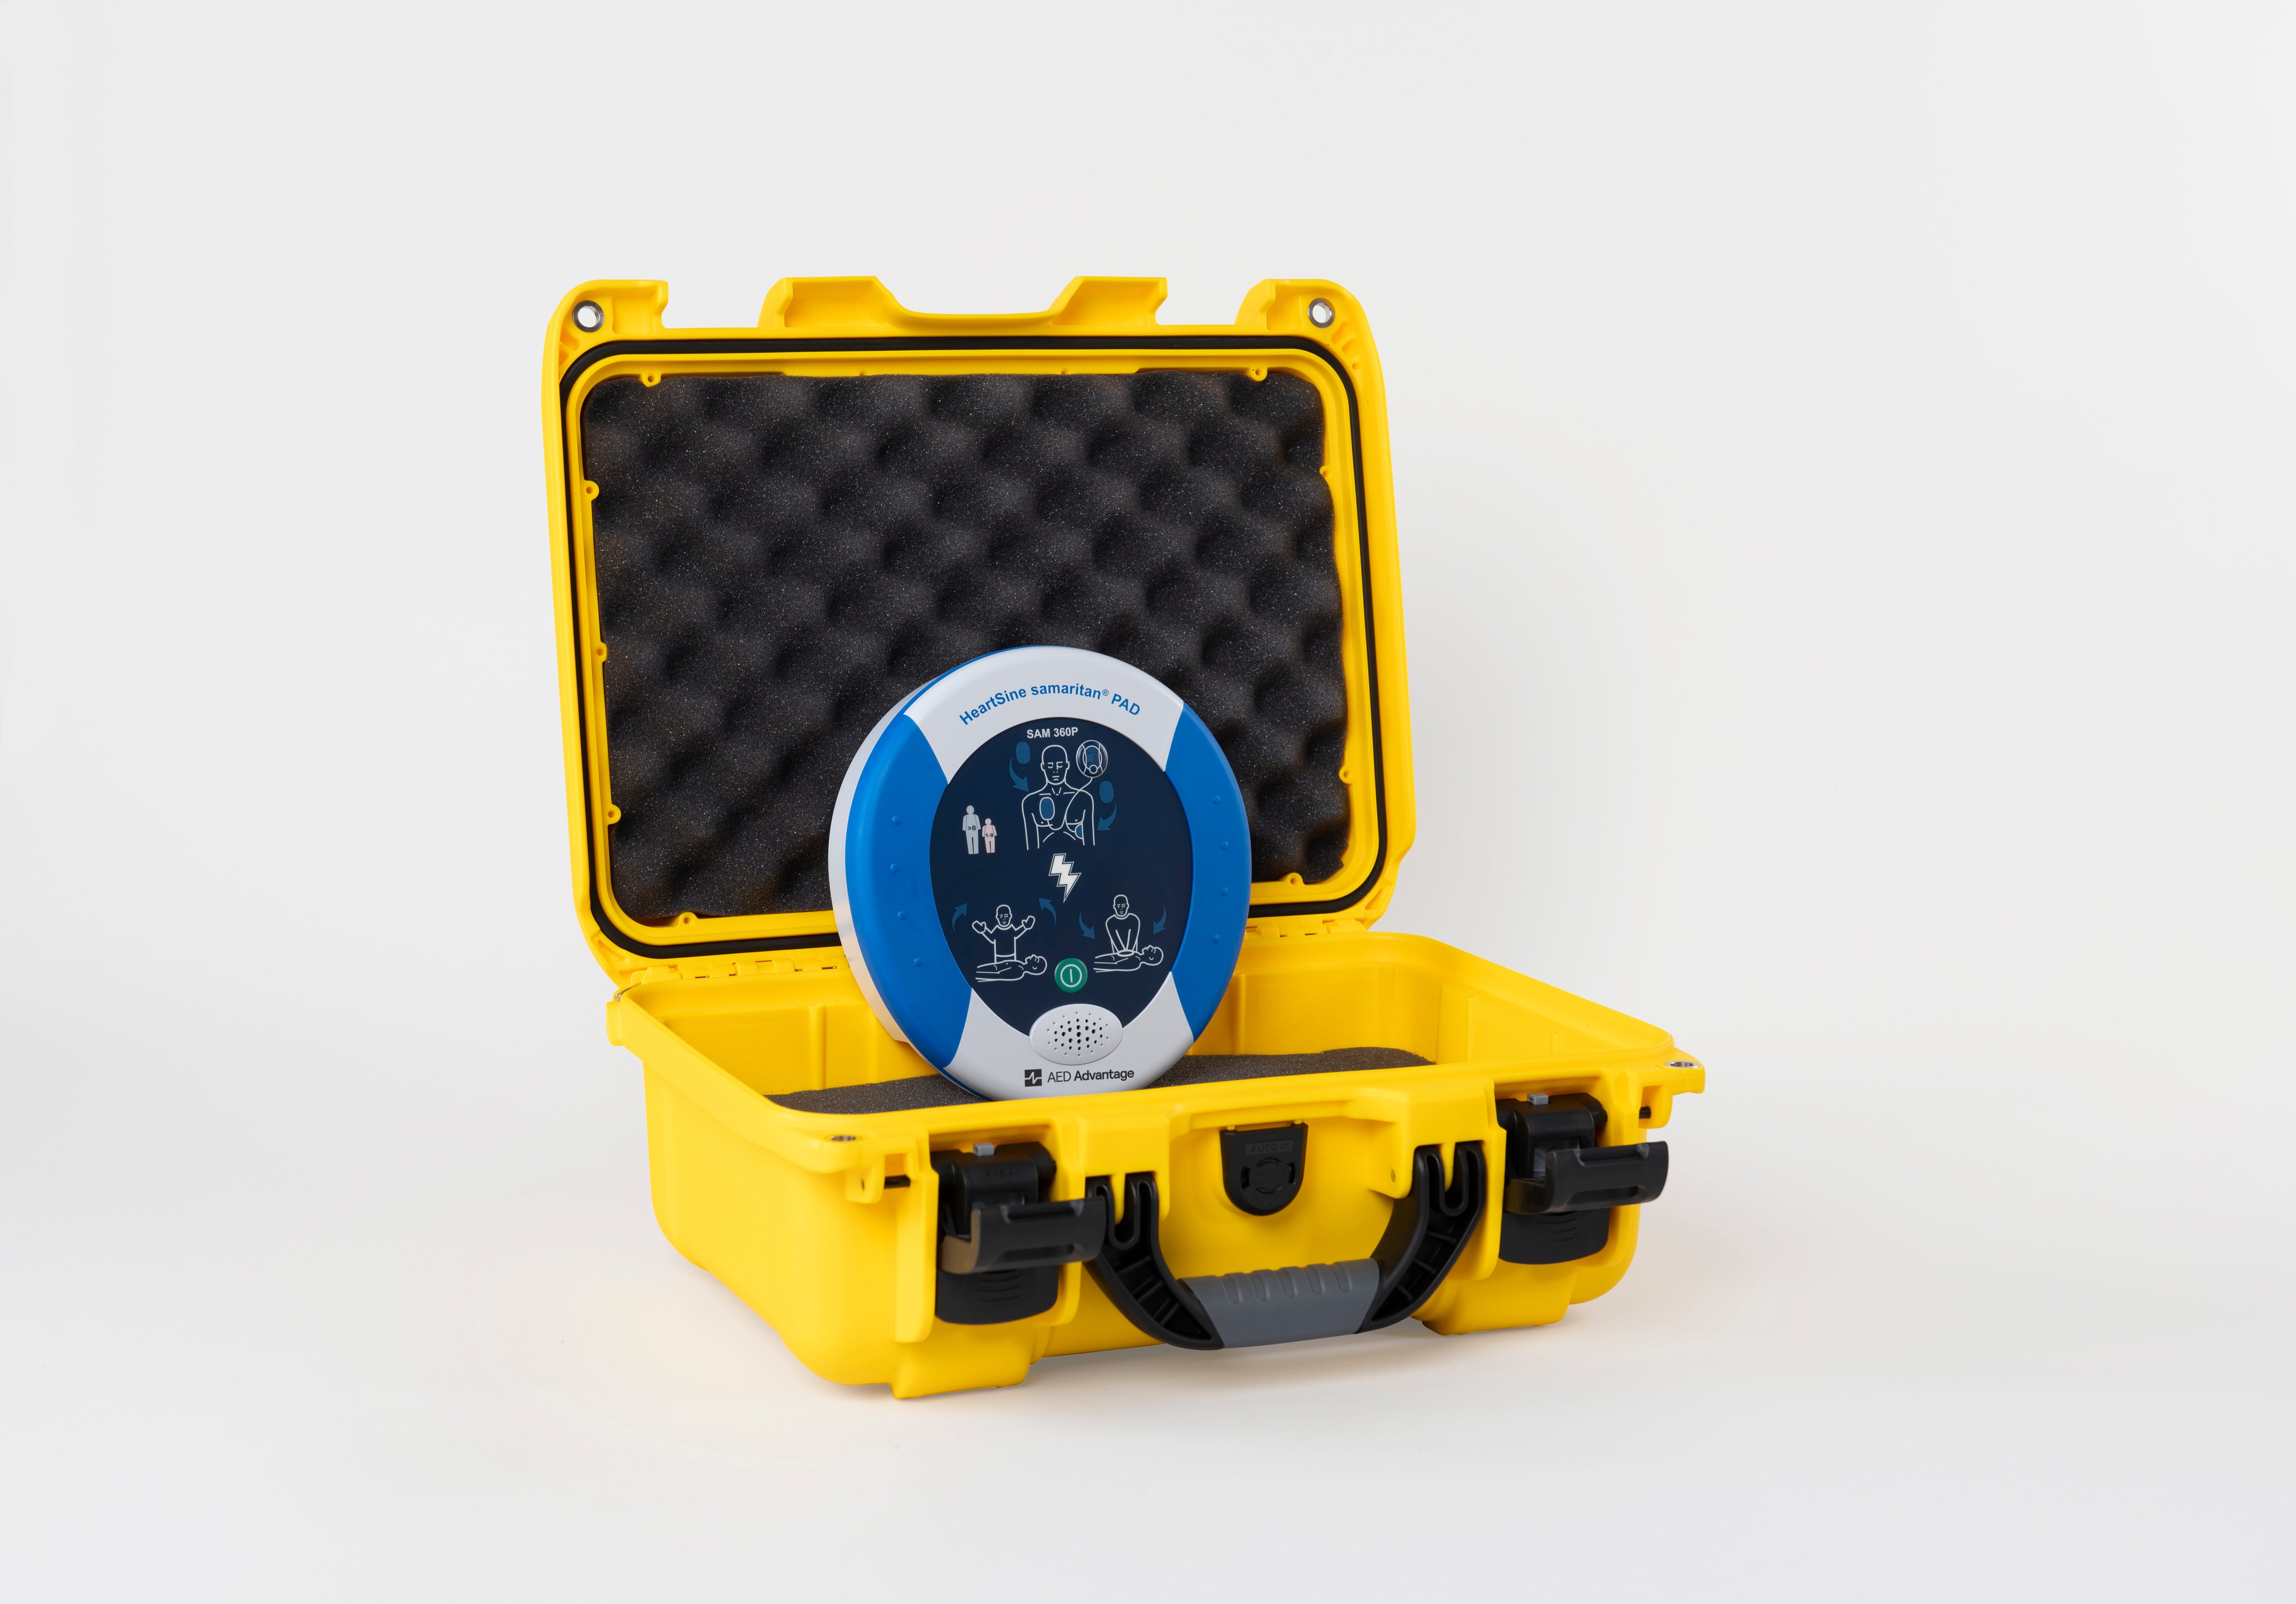 A blue and gray HeartSine 360P AED inside a bright yellow hardshell carry case